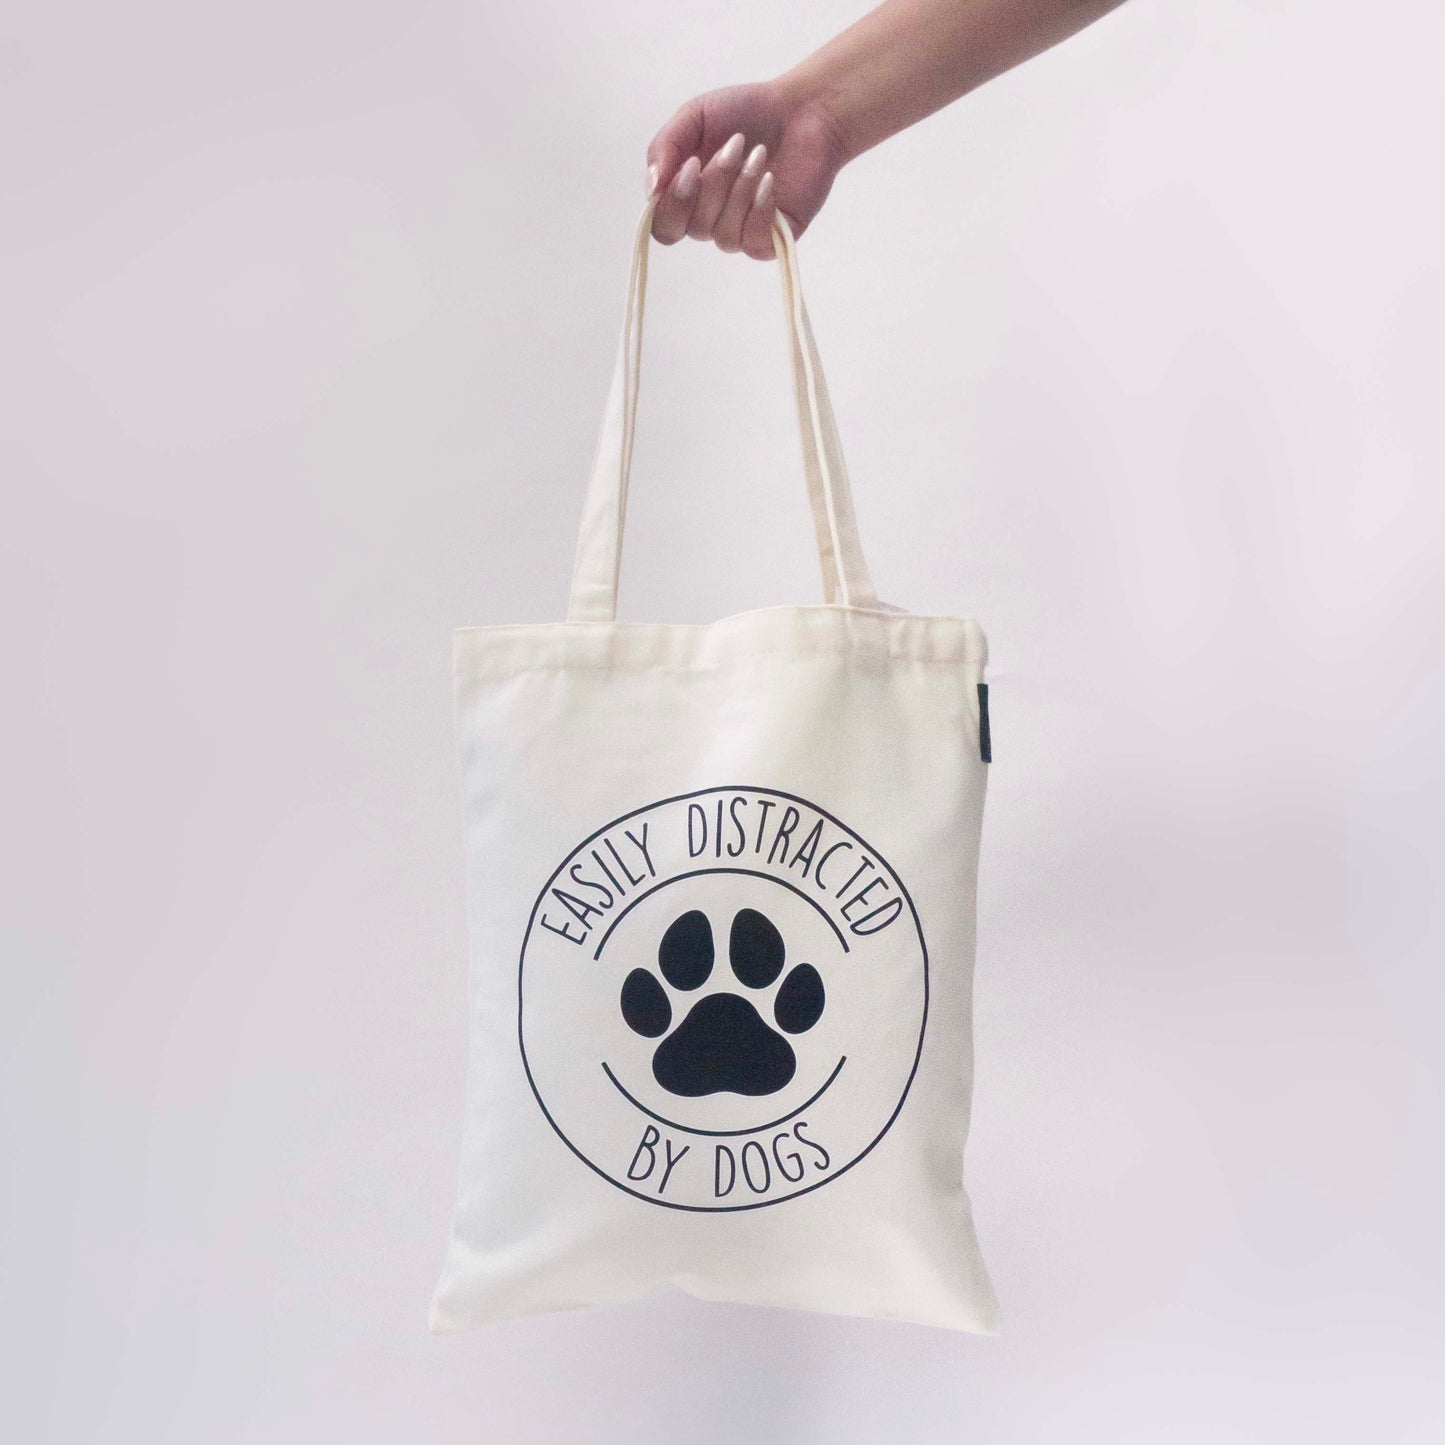 "Easily Distracted By Dogs" Canvas Tote Bag